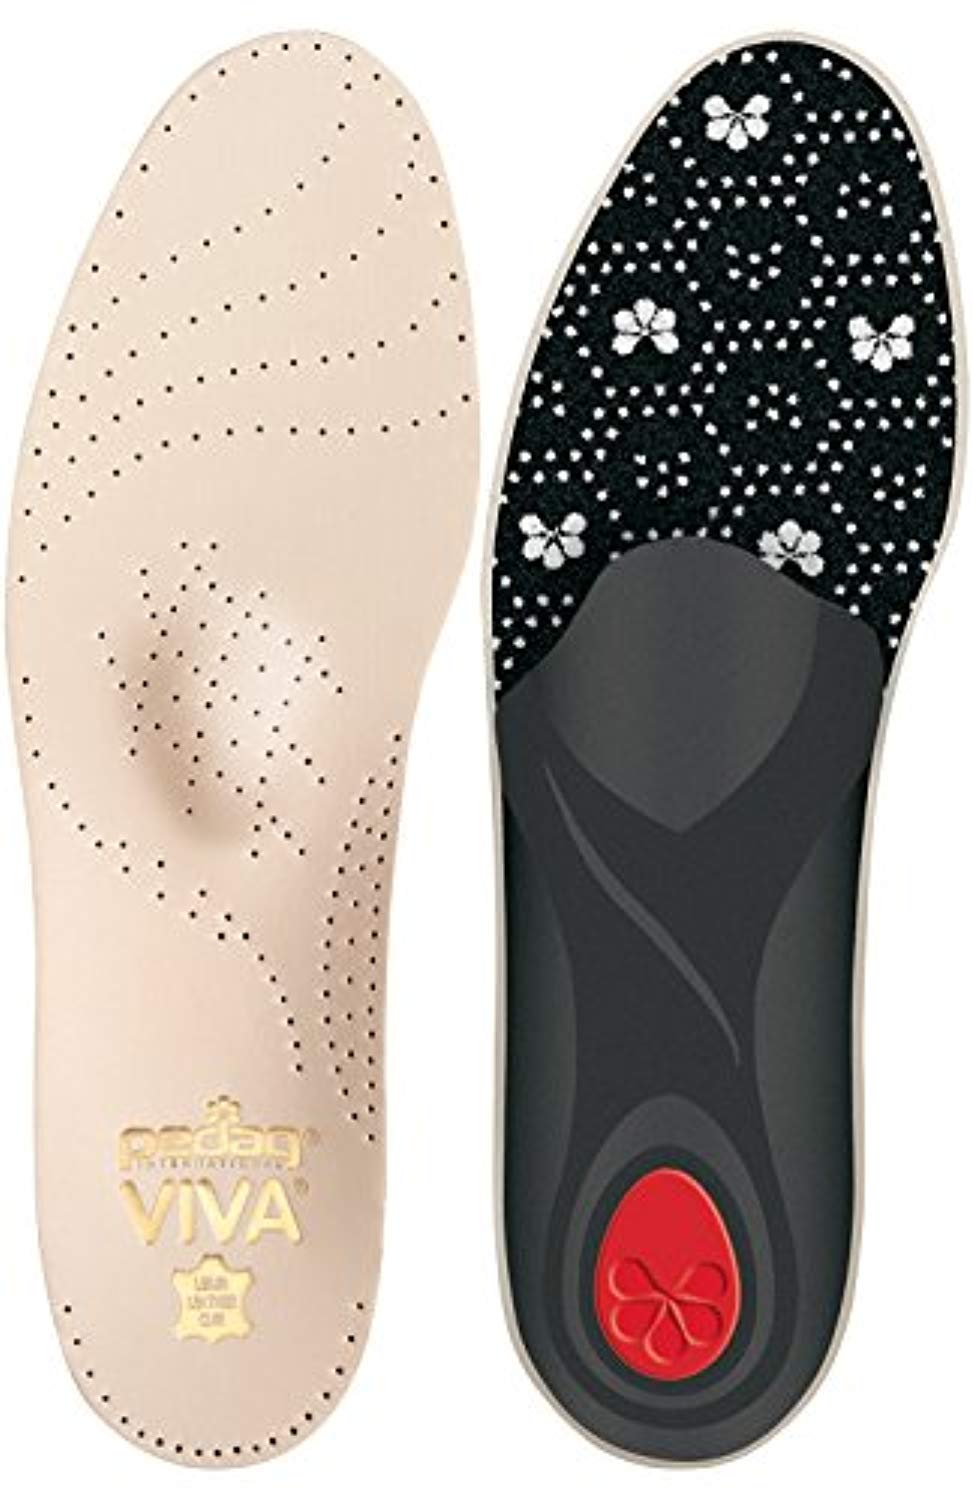 Pedag VIVA Orthotic Insole for Low 